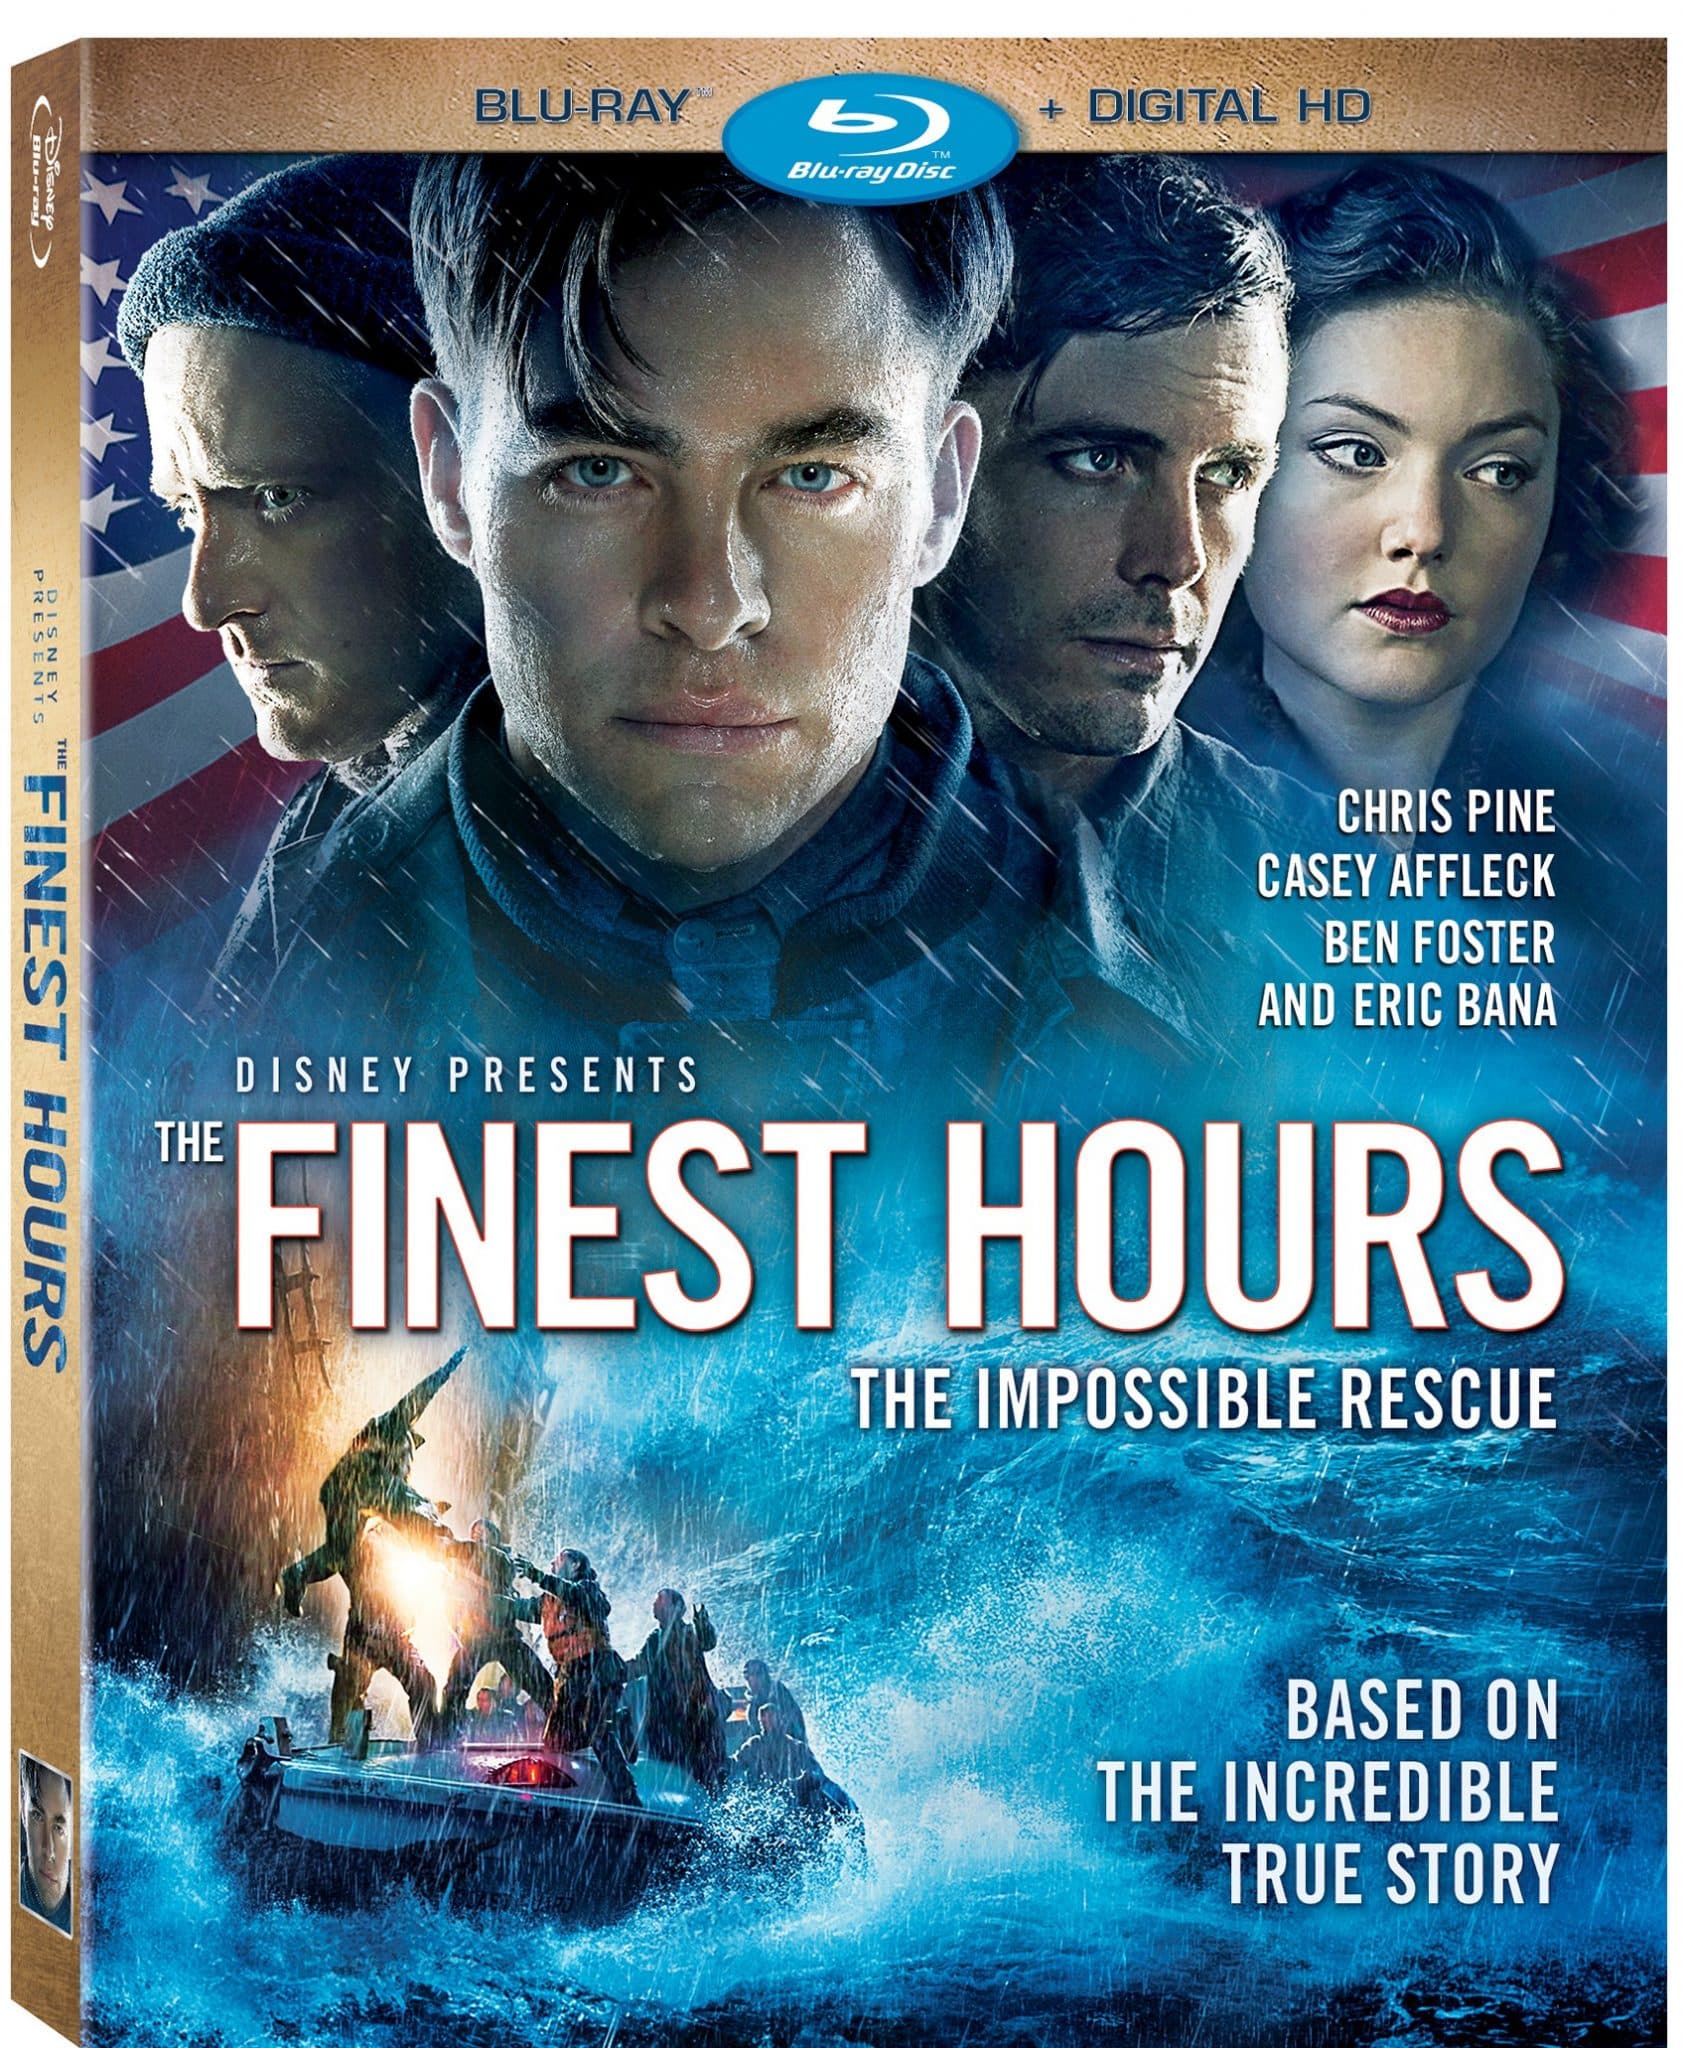 The Finest Hours - On Blu-ray and Digital HD May 24